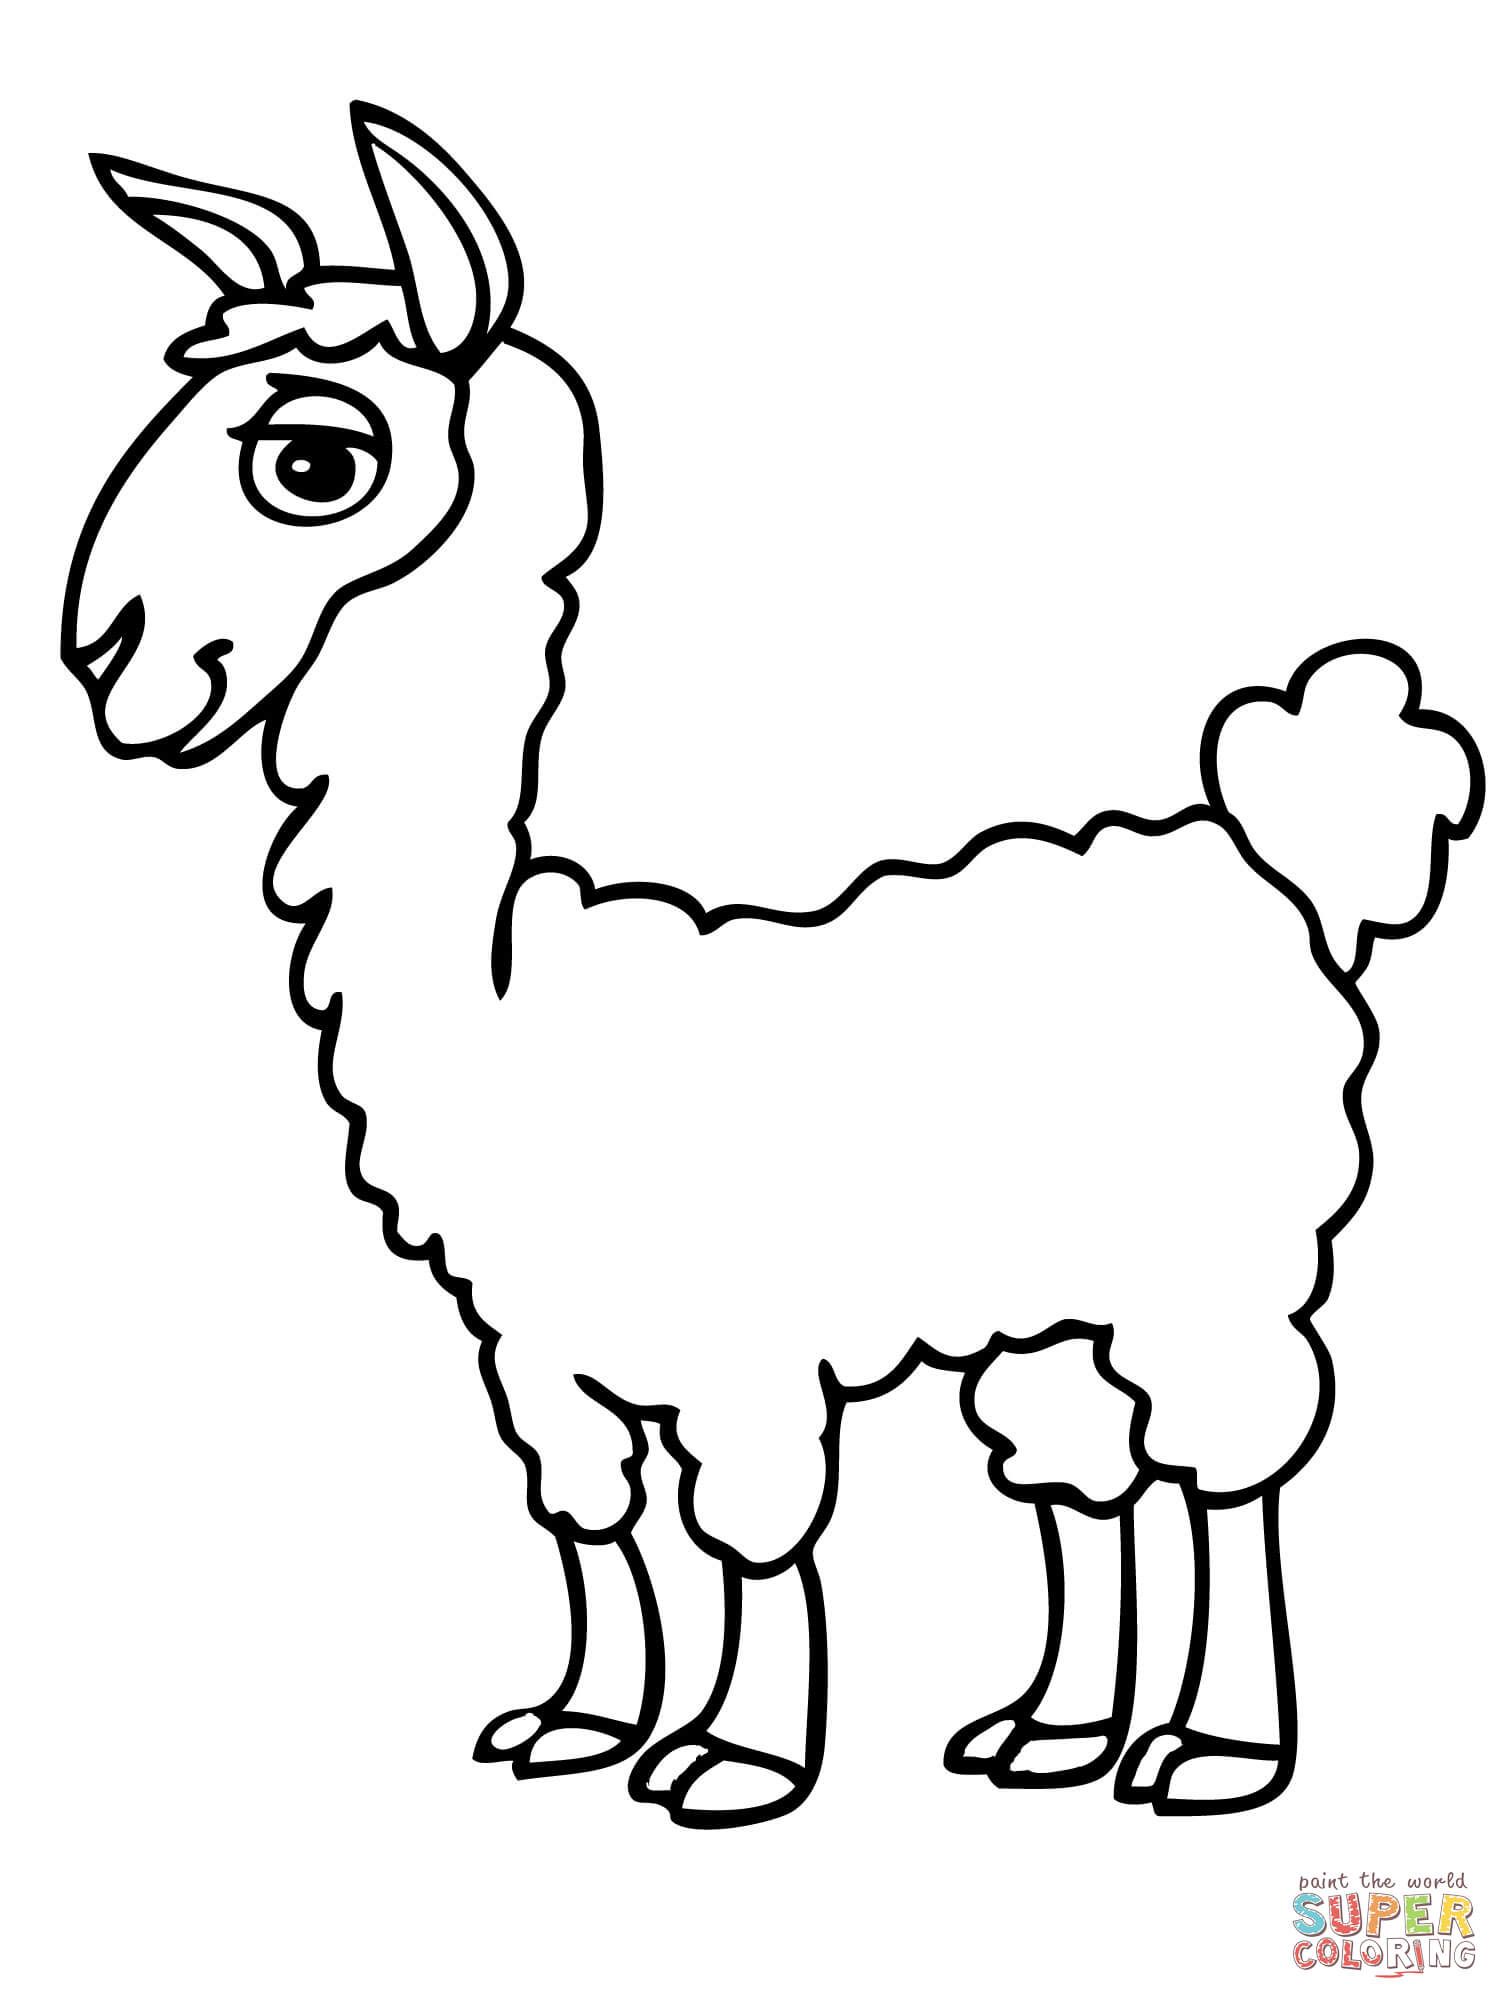 Cute free printable pages. Alpaca clipart coloring page